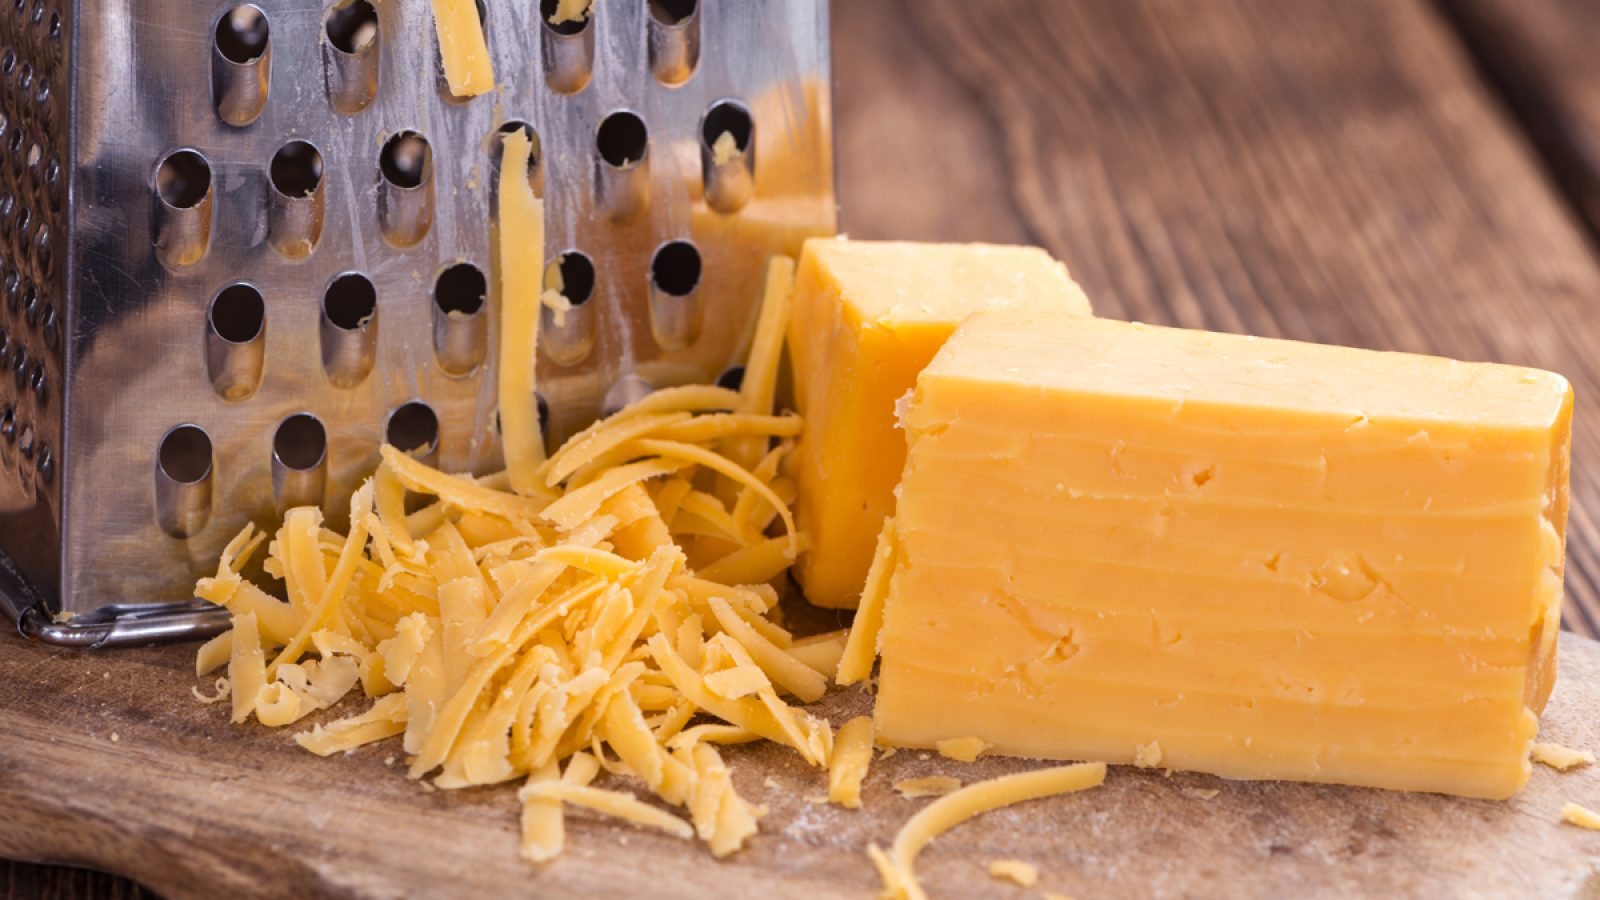 7 Side Effects Of Eating Too Much Cheese According To Experts — Eat This Not That